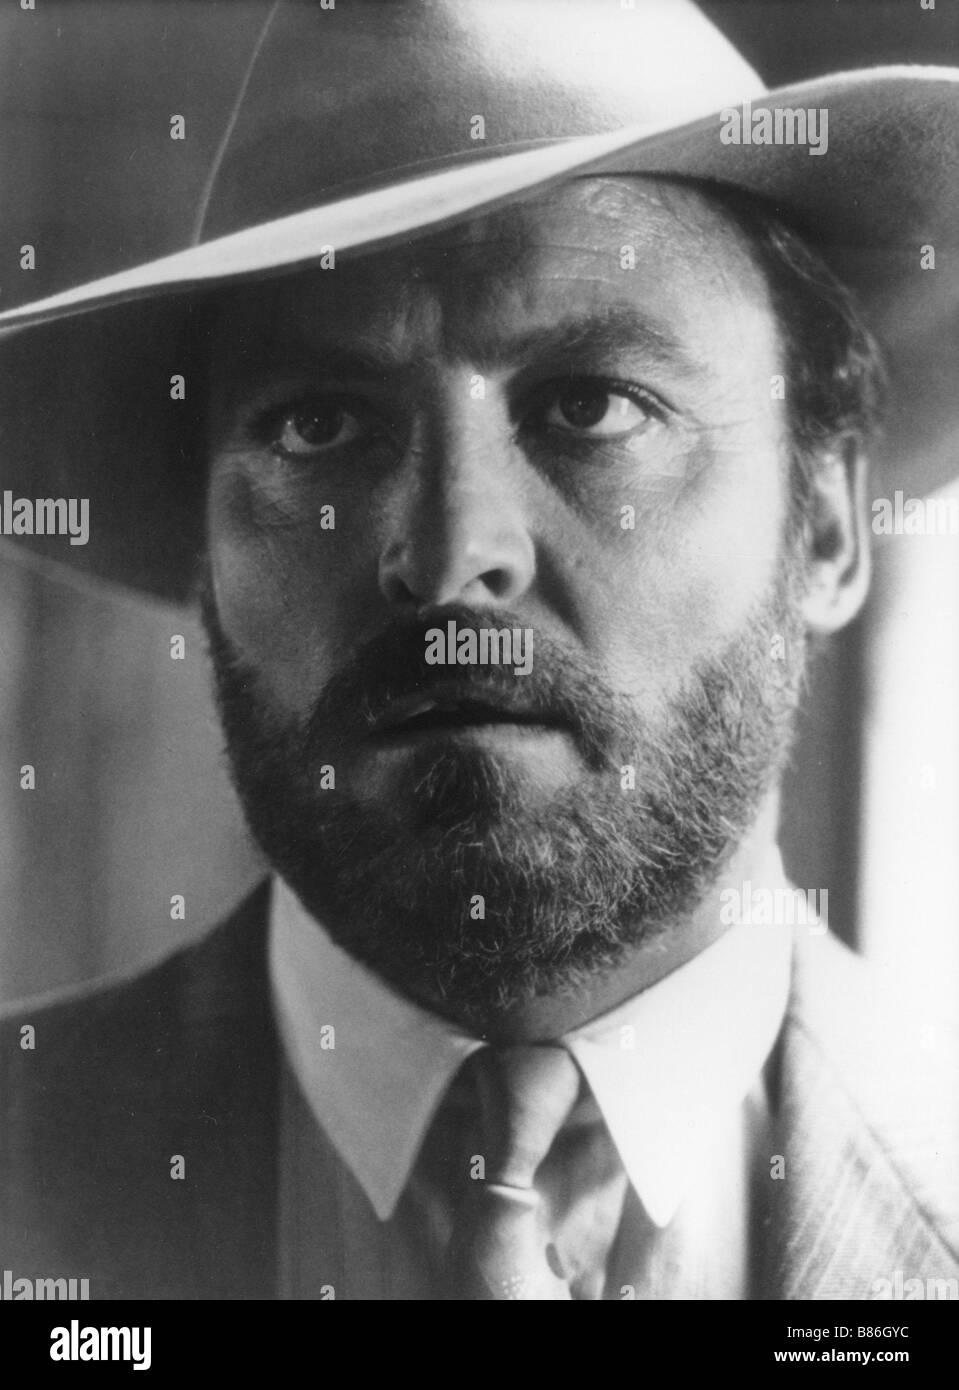 Stacy Keach Stacy Keach Stacy Keach dans le film 'butterfly' Stock Photo